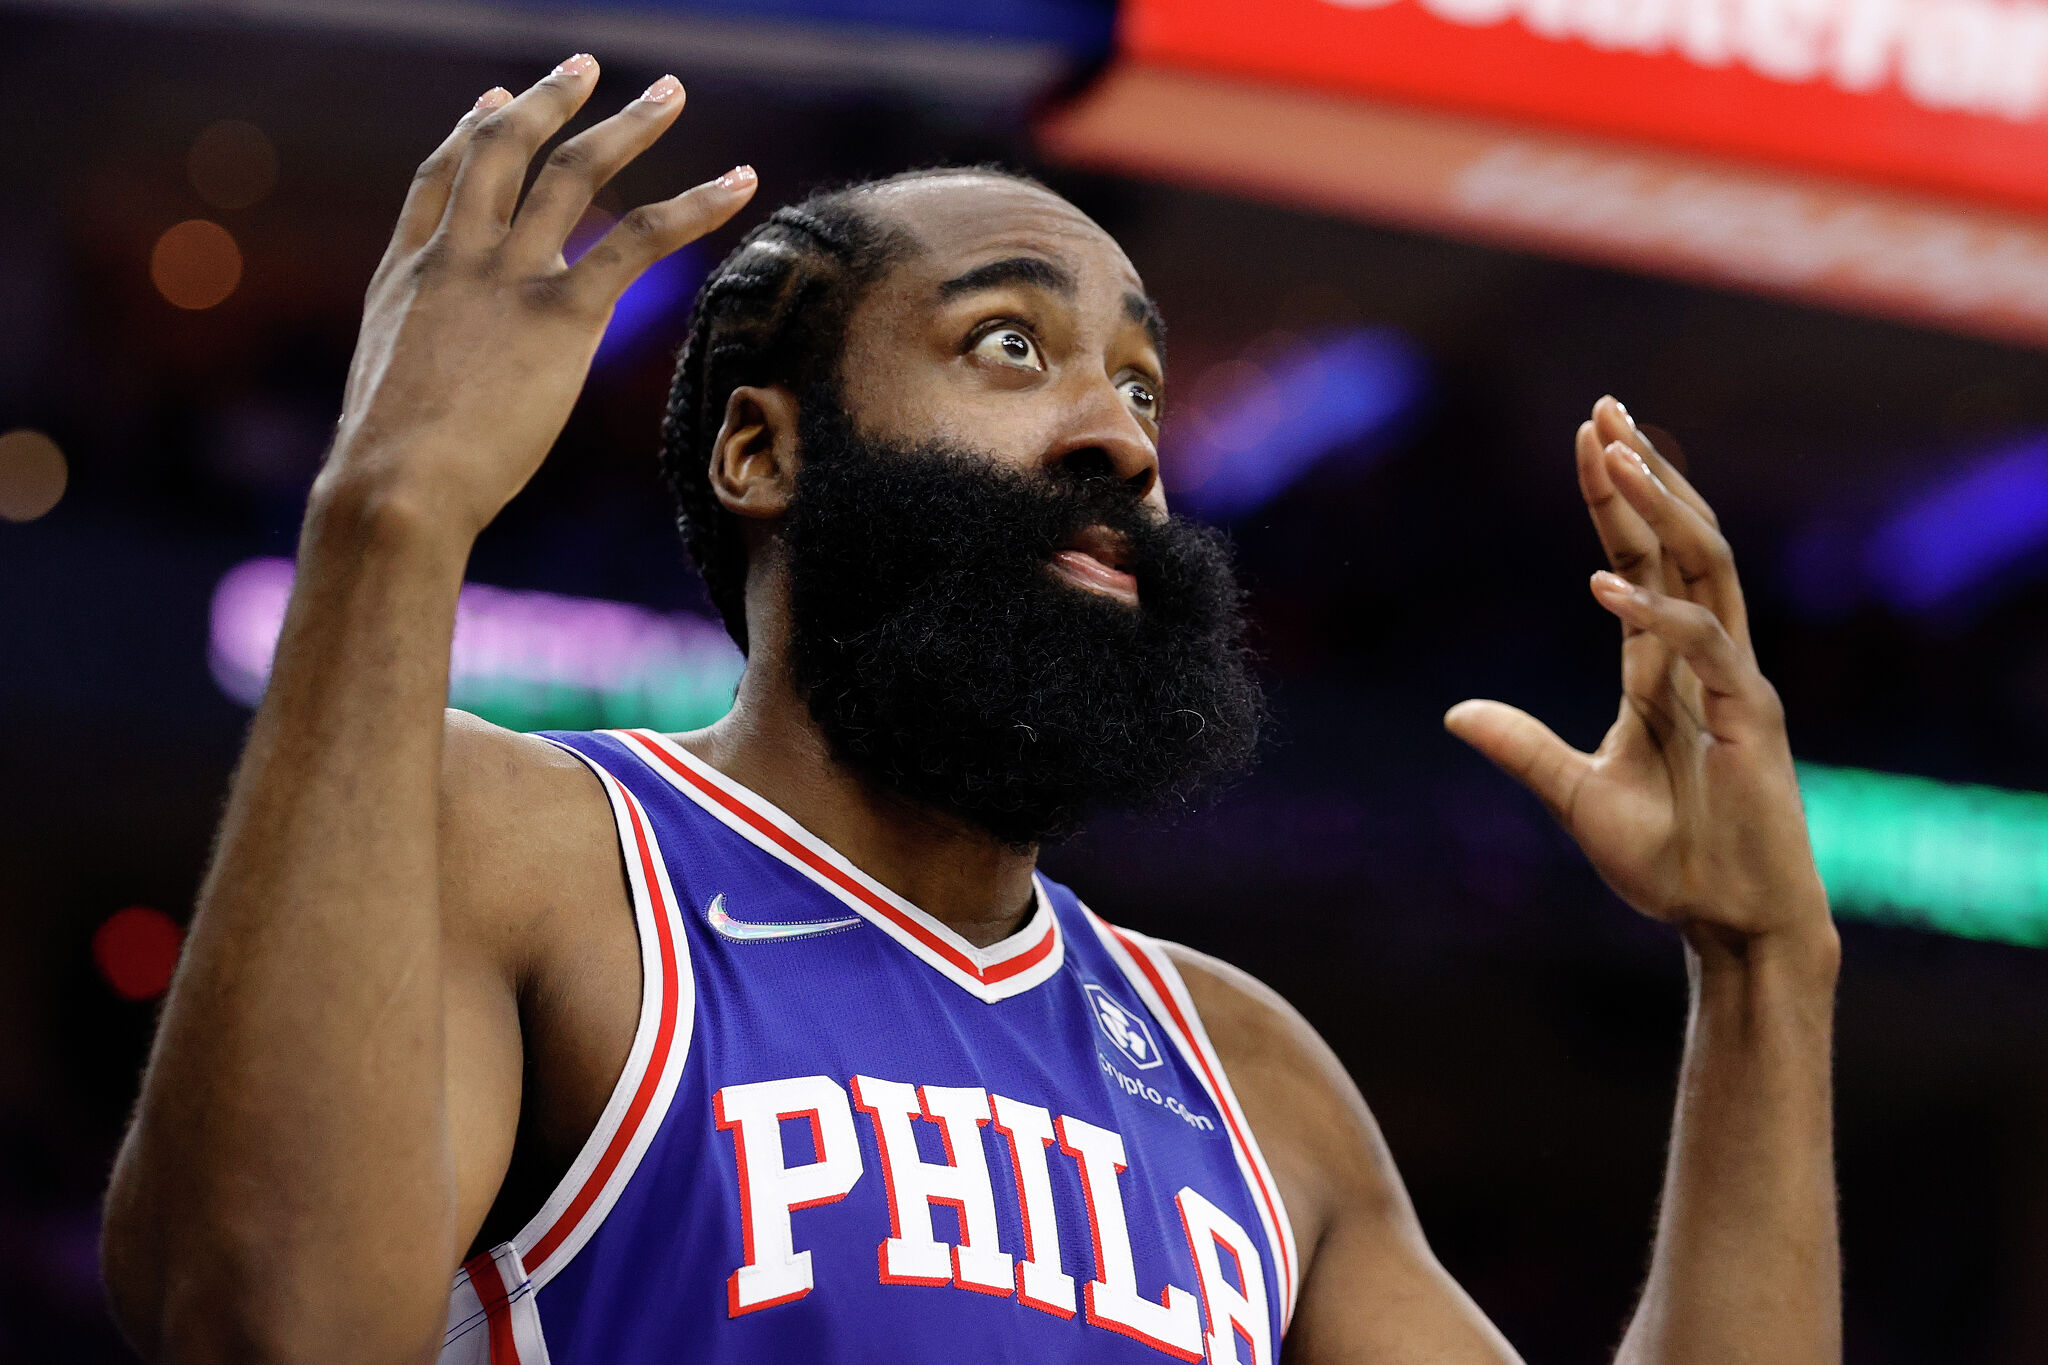 NBA star James Harden spotted working out at Houston-area gym